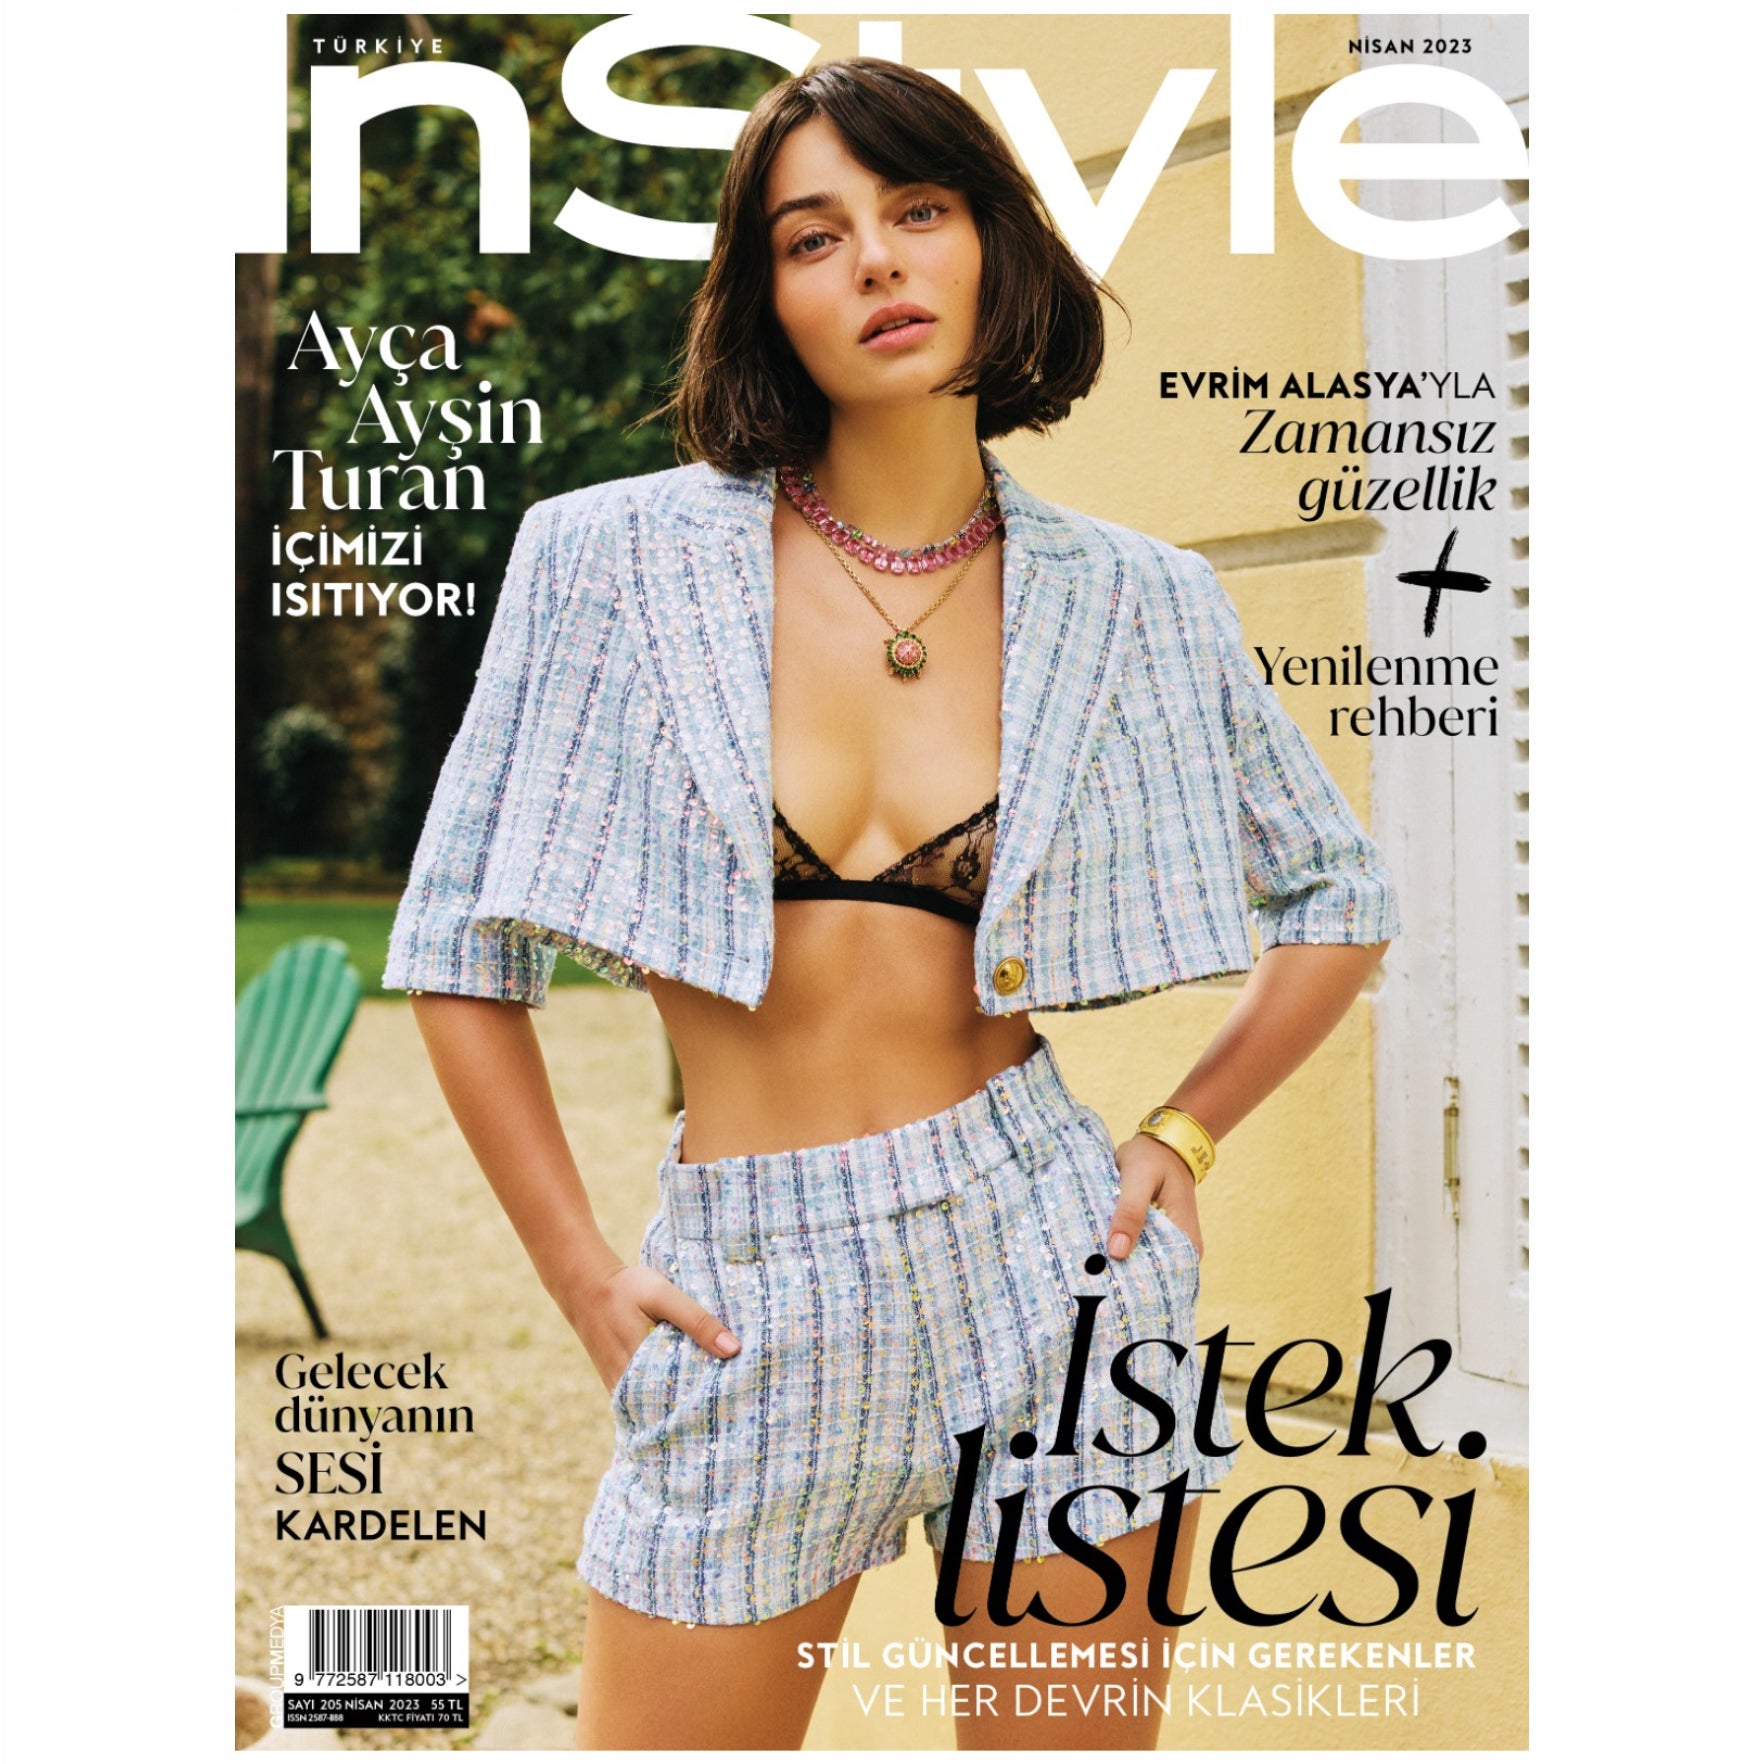 InStyle April'23